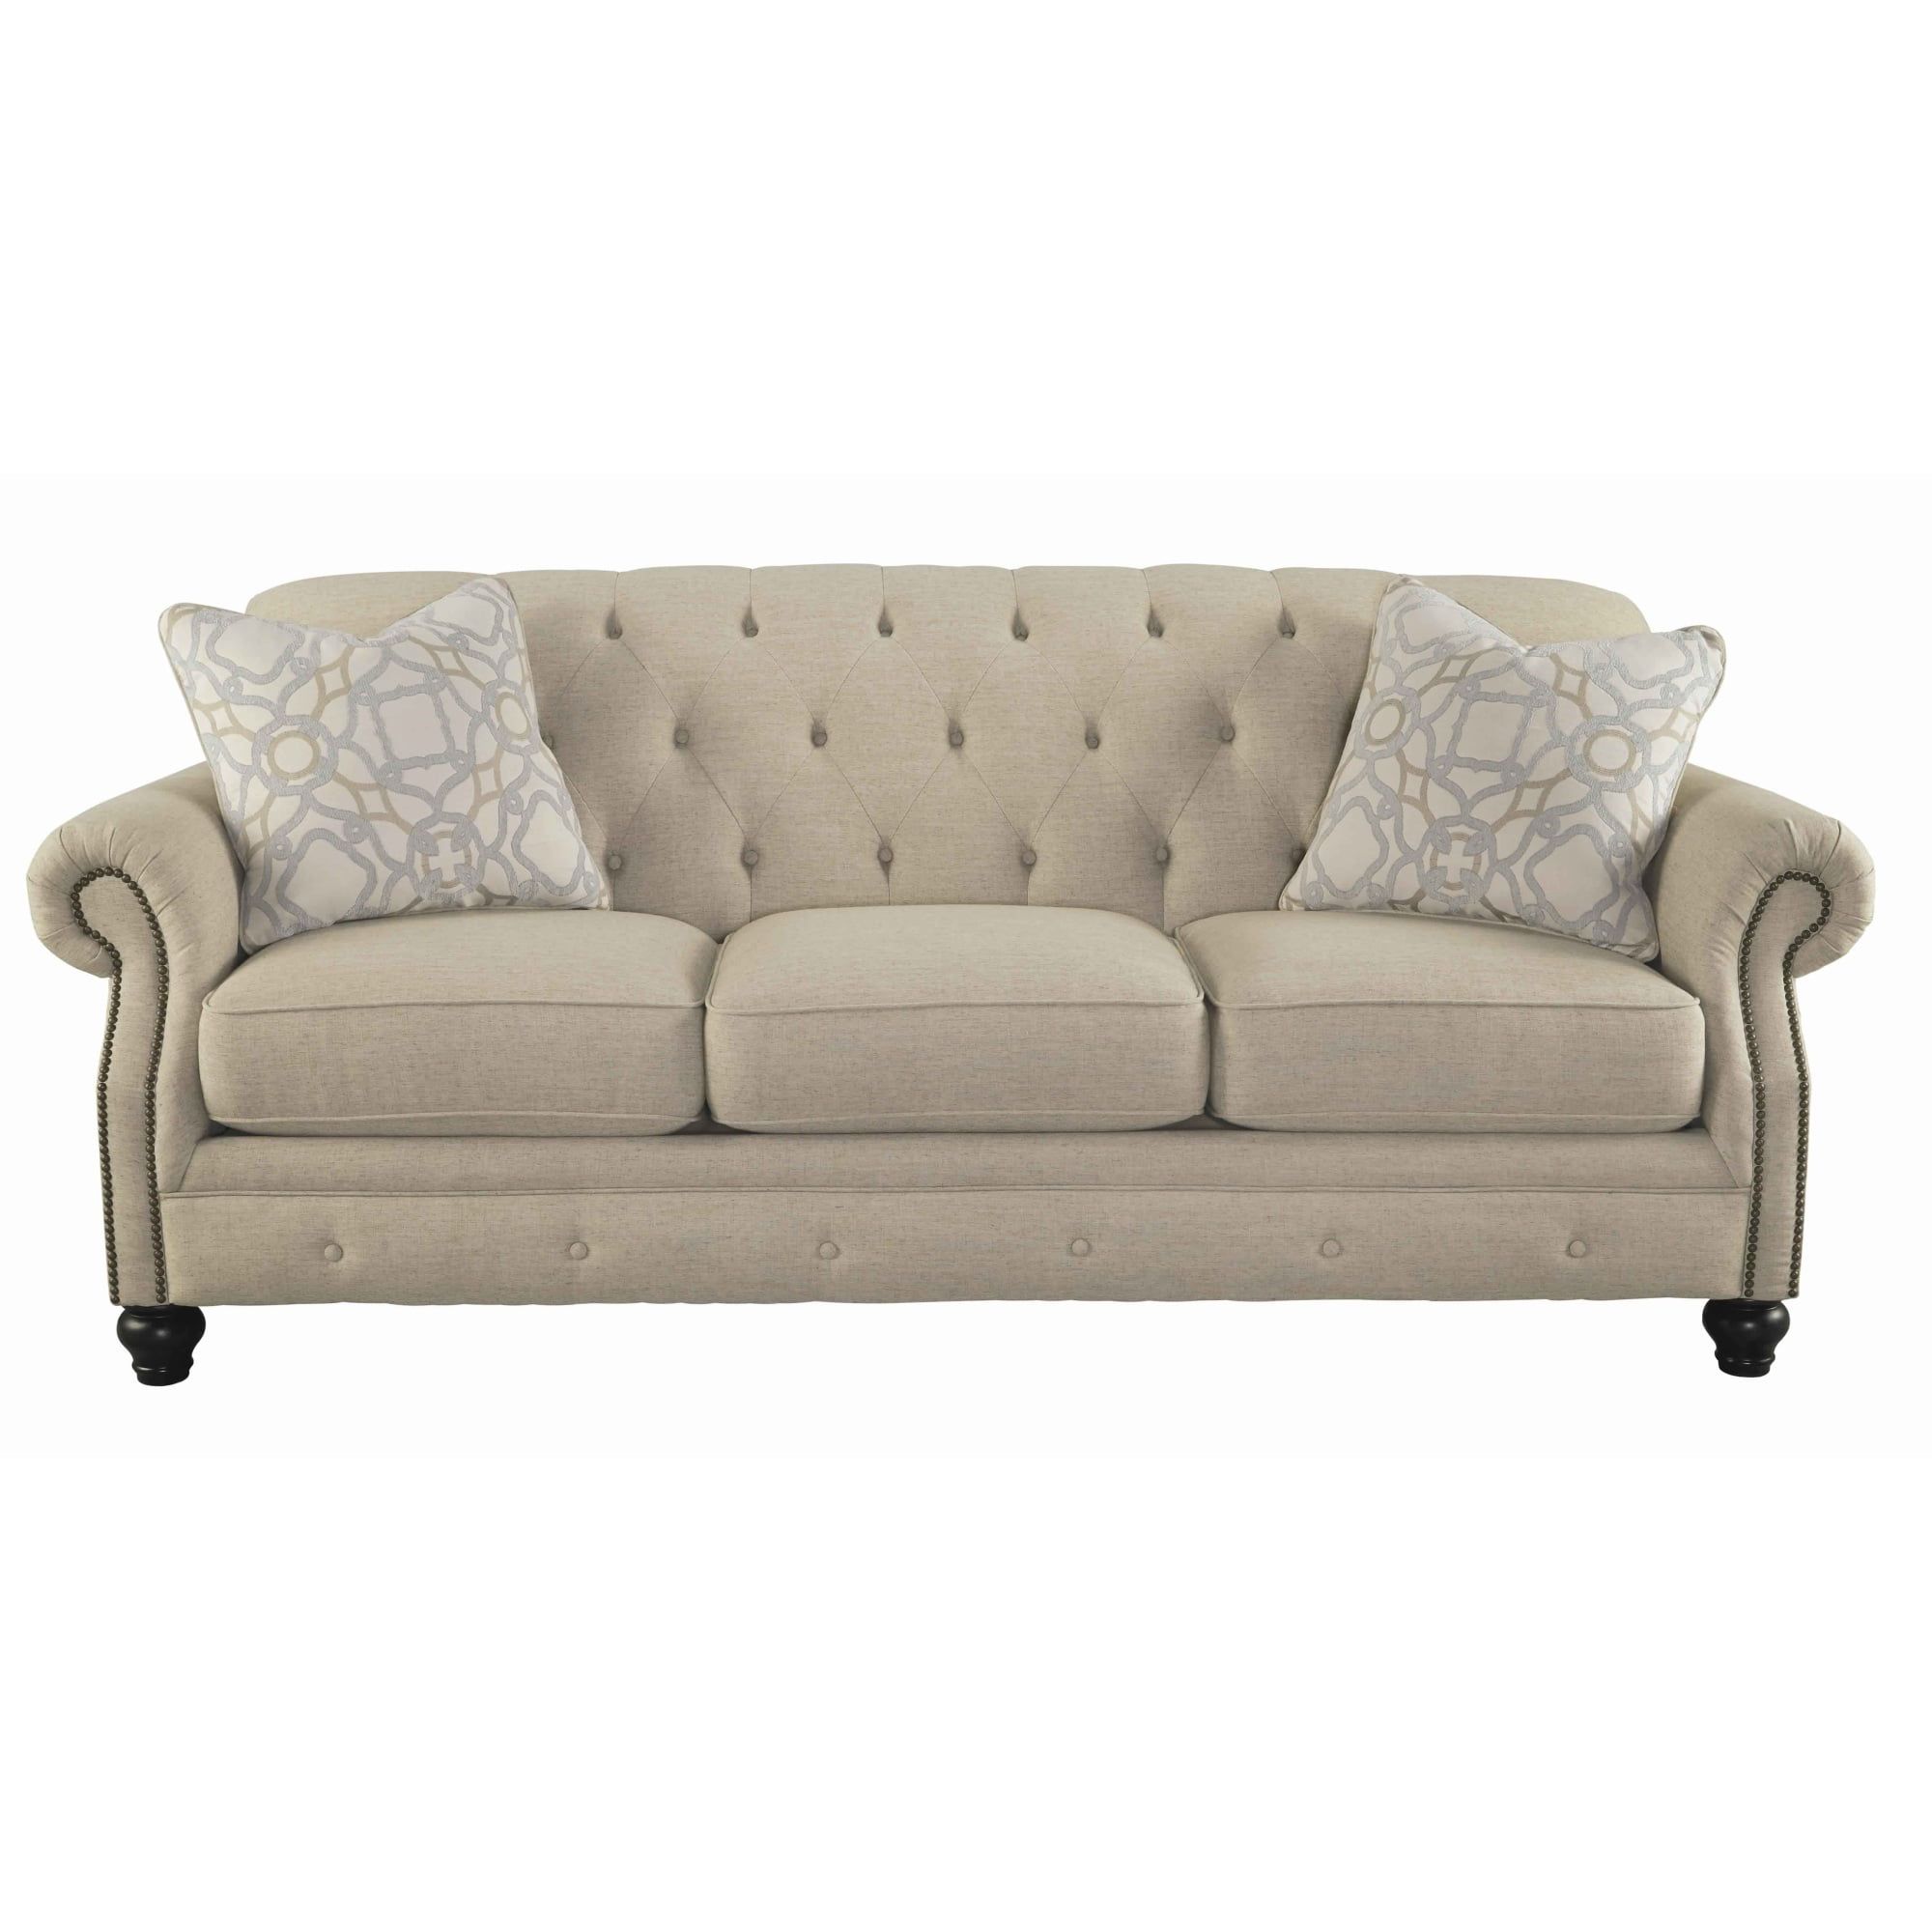 Chesterfield Design Fabric Upholstered Sofa With Button Tufted Back Within Tufted Upholstered Sofas (Gallery 7 of 20)